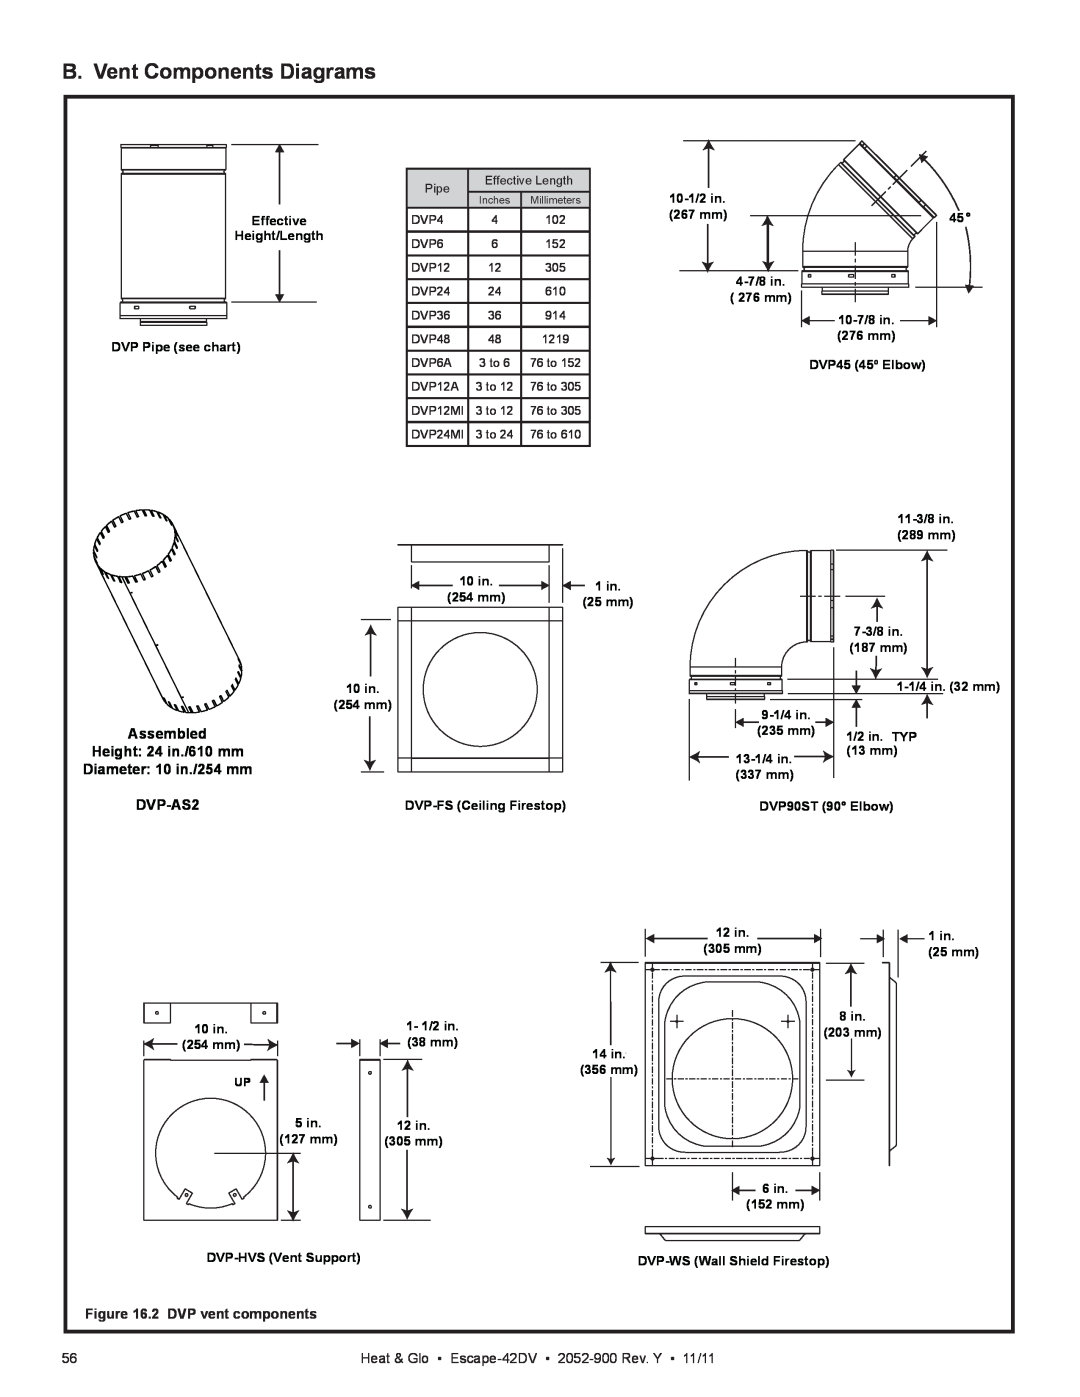 Heat & Glo LifeStyle Escape-42DVLP owner manual B. Vent Components Diagrams, Height: 24 in./610 mm, DVP-AS2, Assembled 